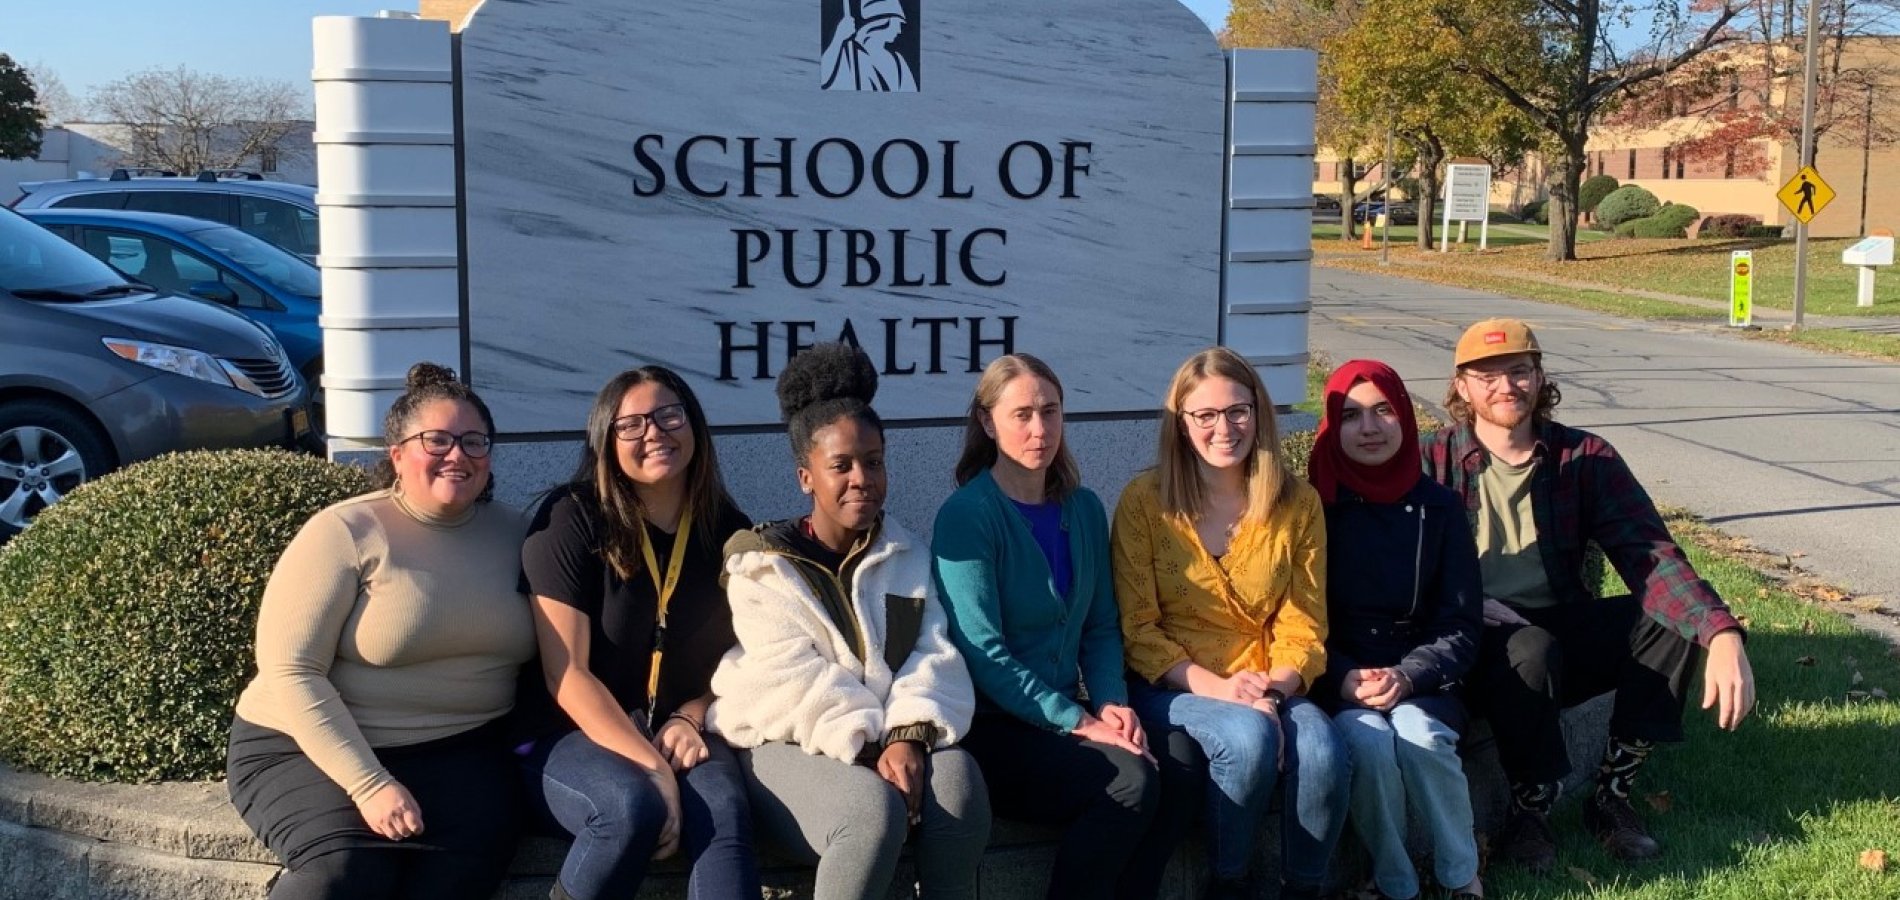 PFAS Study UAlbany Team sitting in front of School of Public Health sign